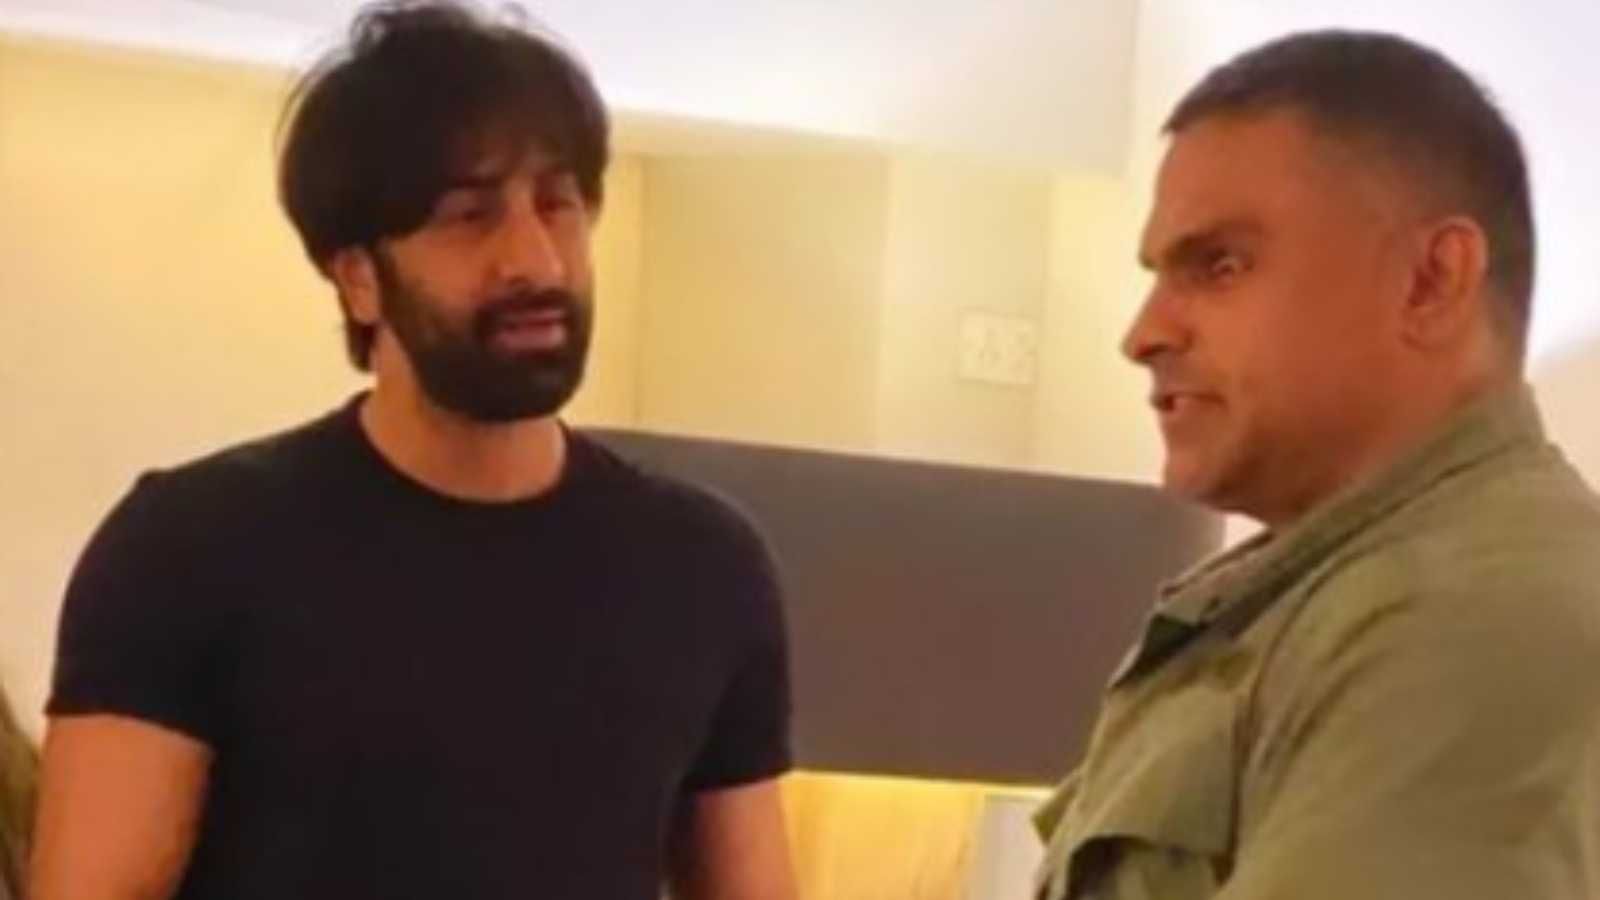 Ranbir Kapoor toh pura depressed lag raha hai' : Netizens troll the actor  in his latest pic with brother-in-law Rahul Bhatt